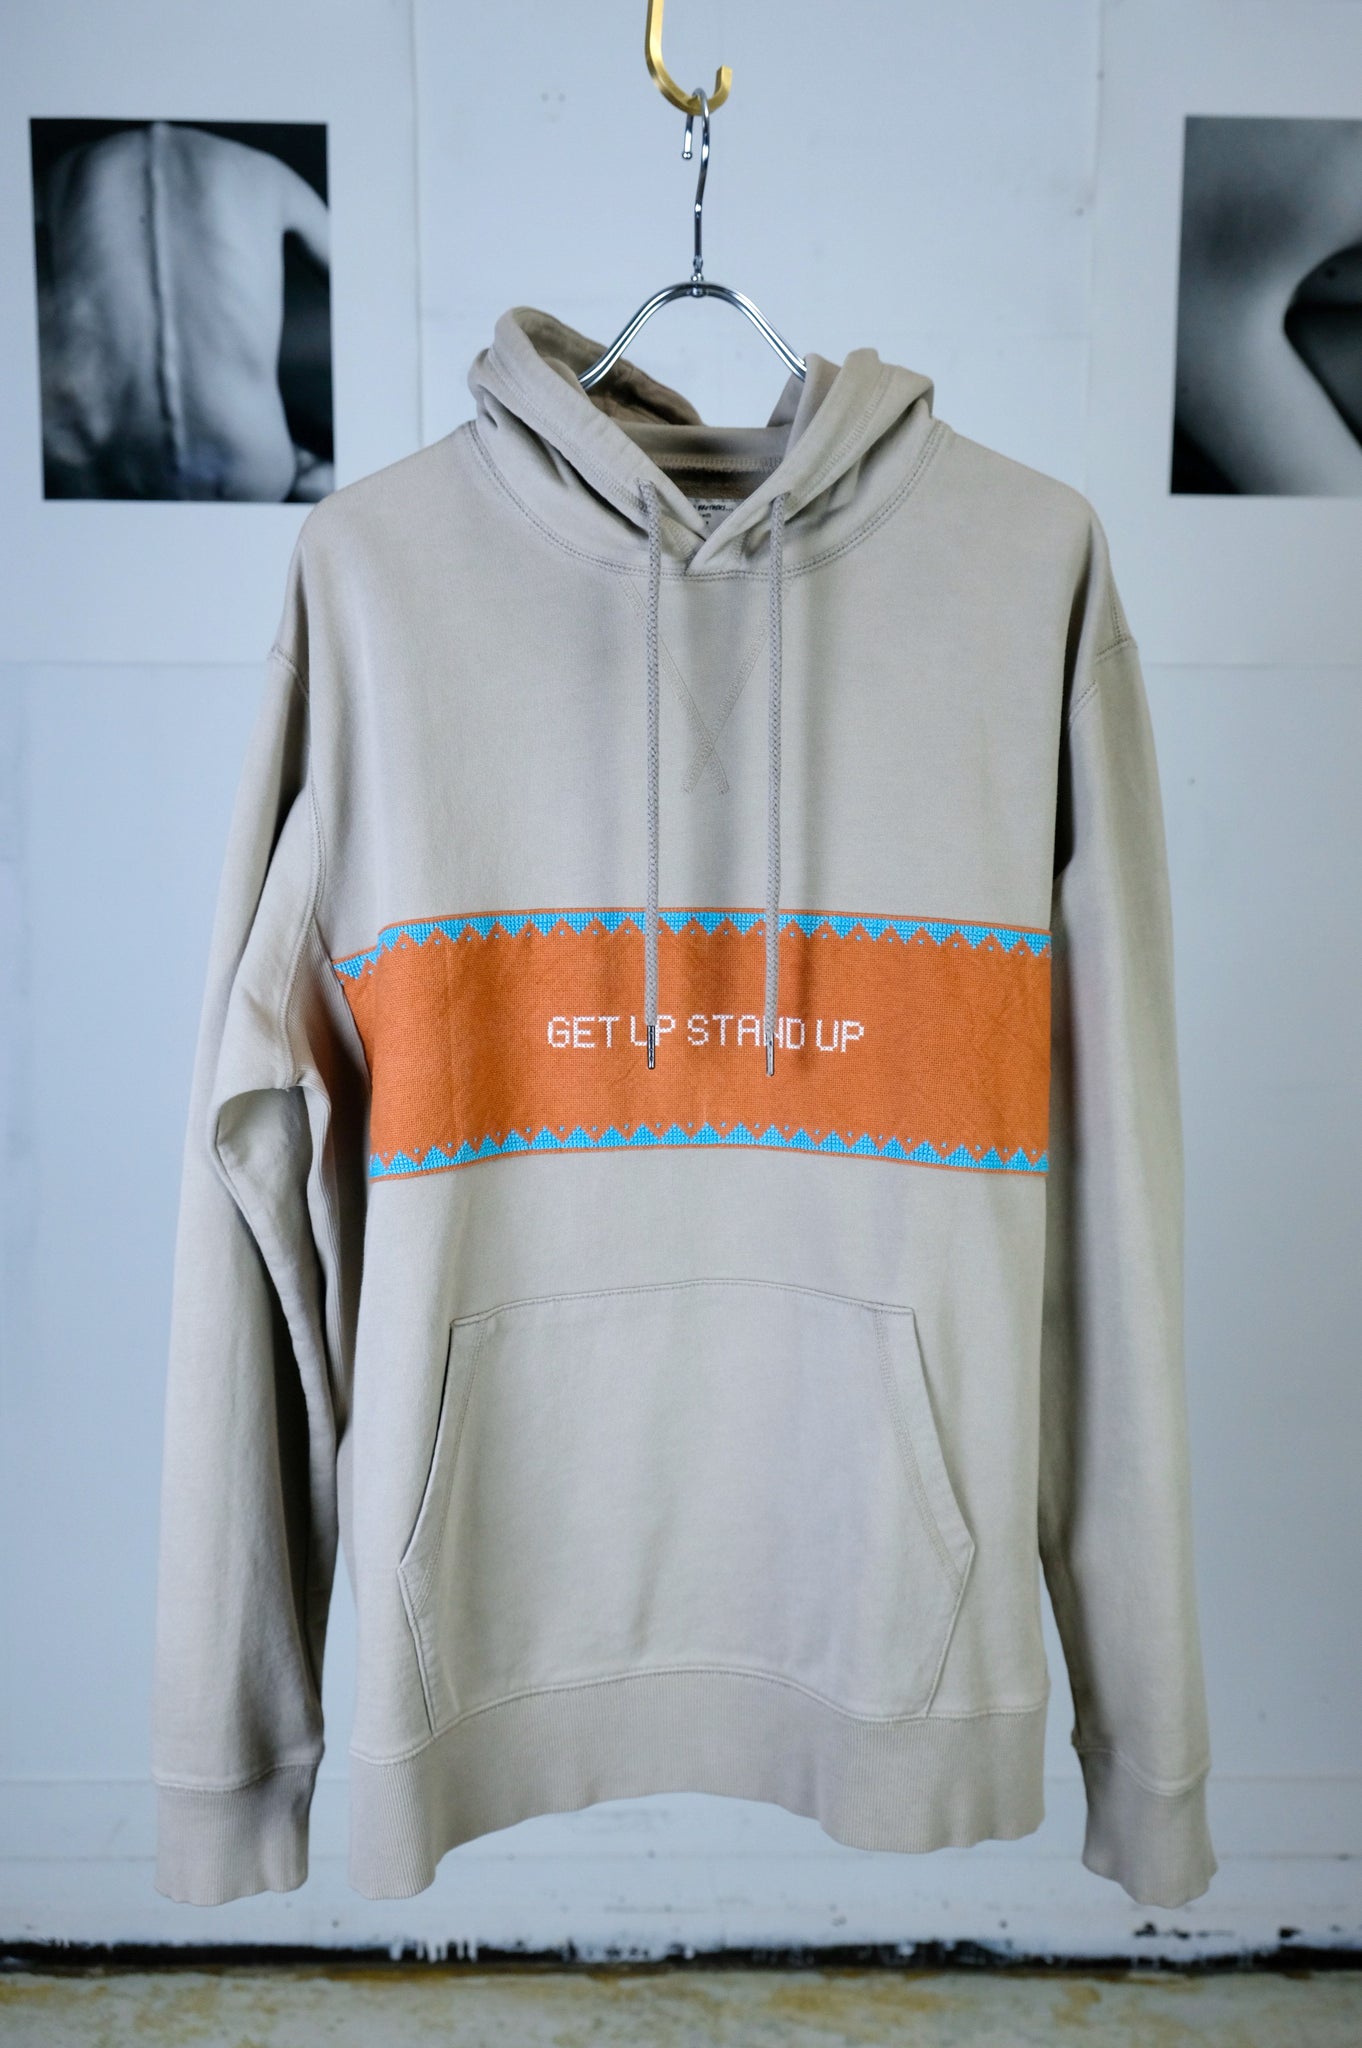 THE INOUE BROTHERS...×ADISH "GET UP STAND UP HOODY"